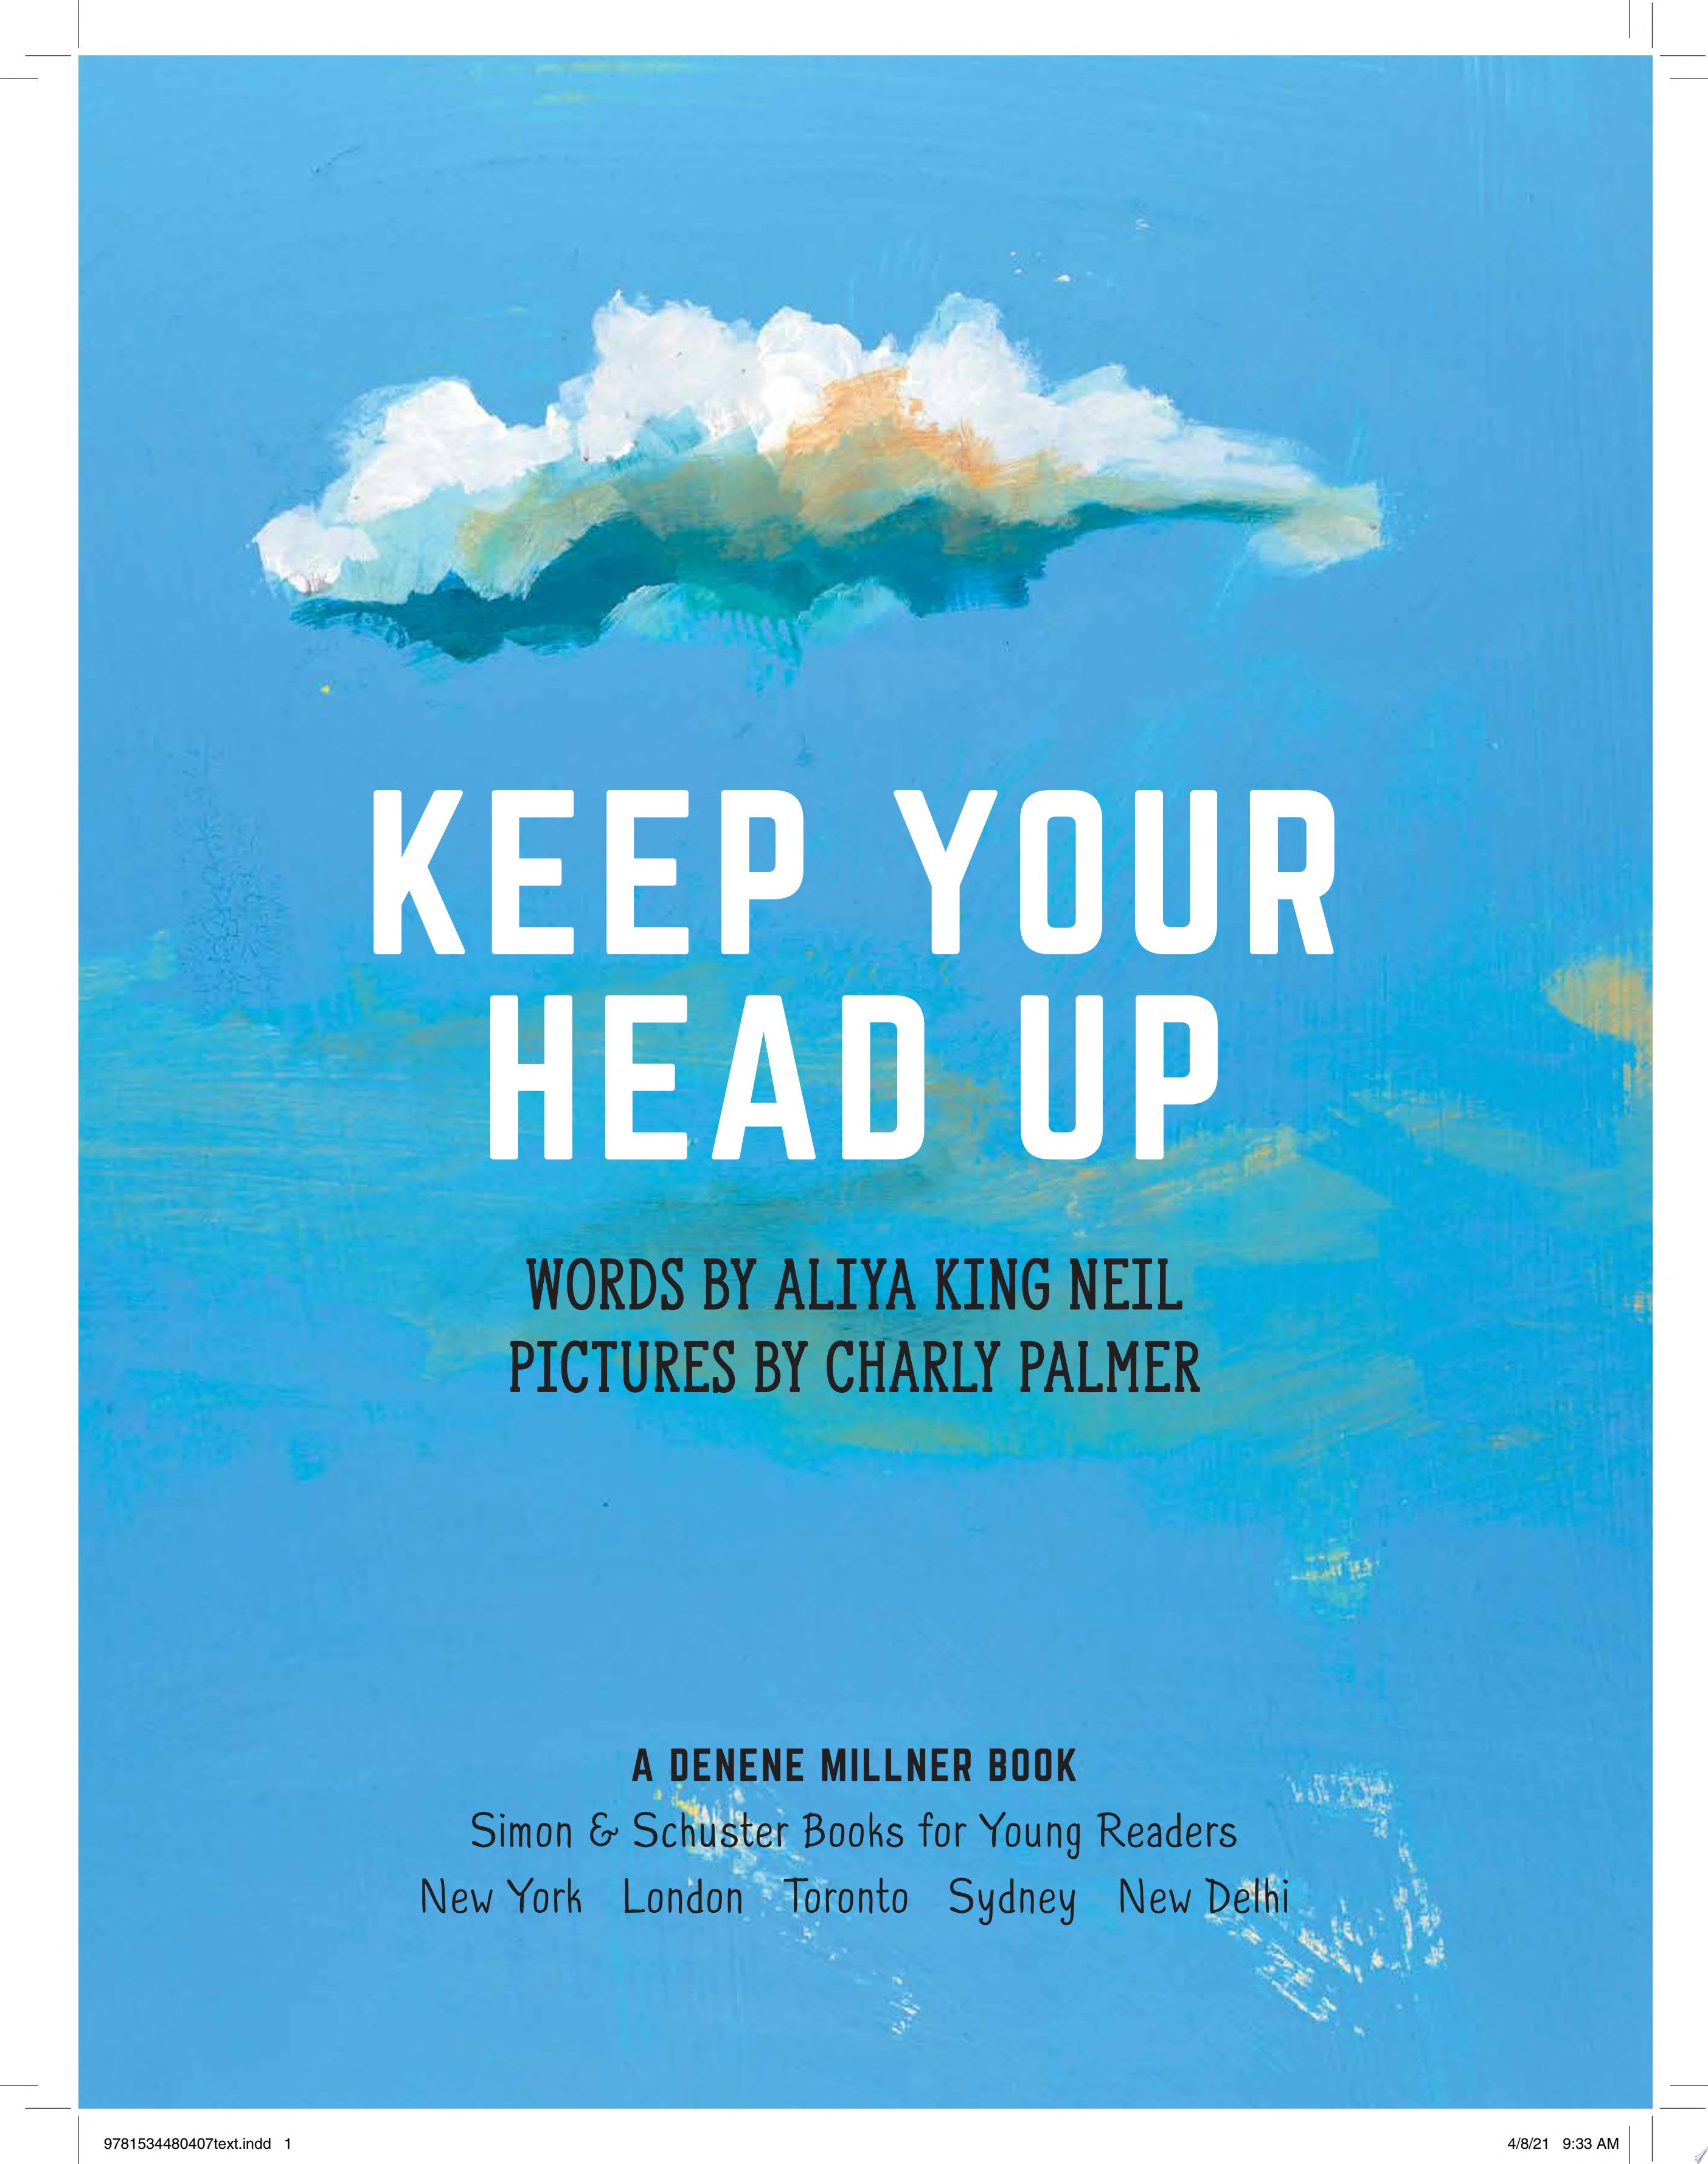 Image for "Keep Your Head Up"